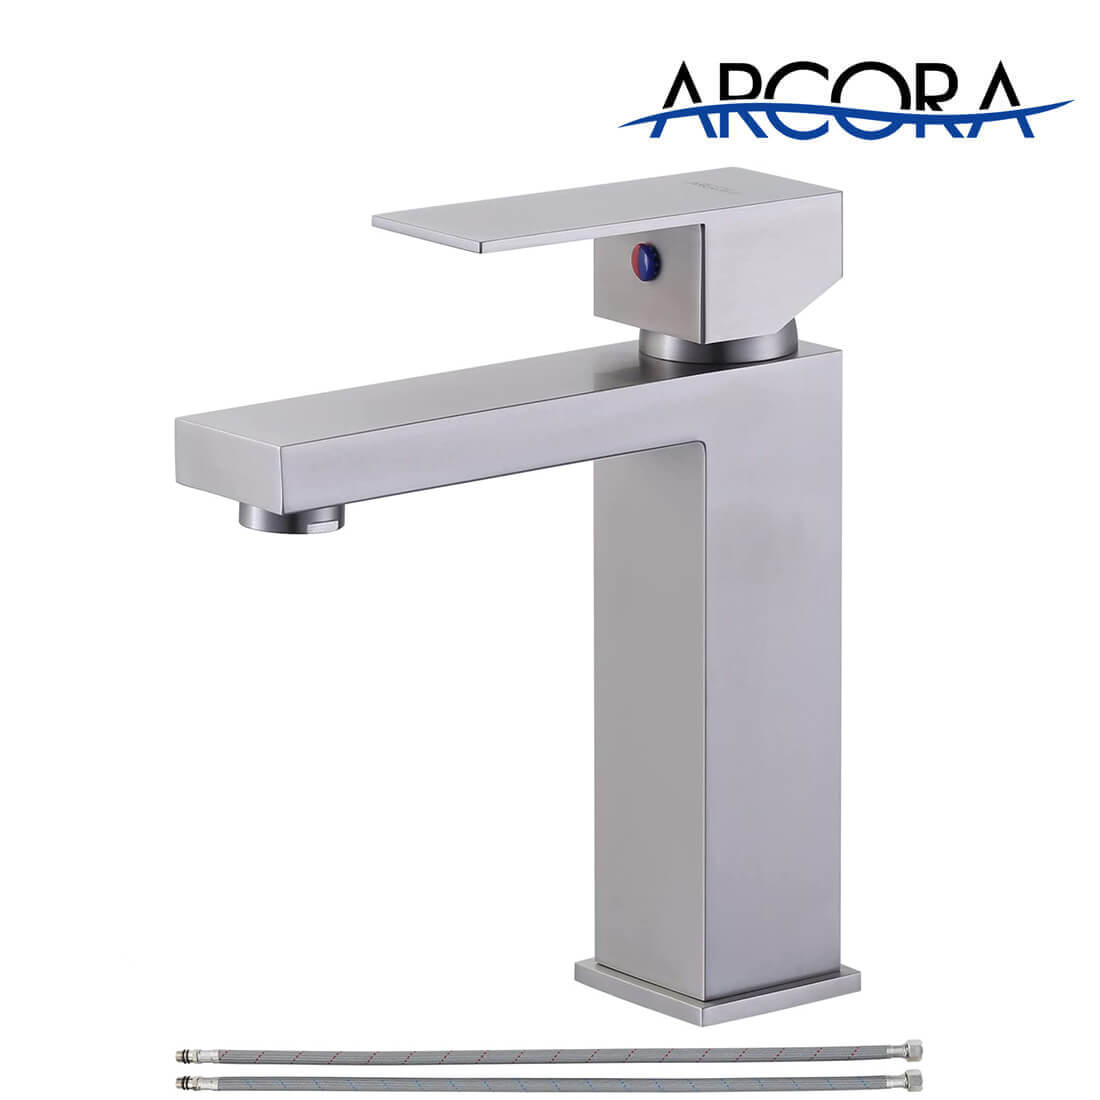 ARCORA Modern Single Handle Bathroom Faucet Brushed Nickel with cUPC Supply Line (1 Hole)